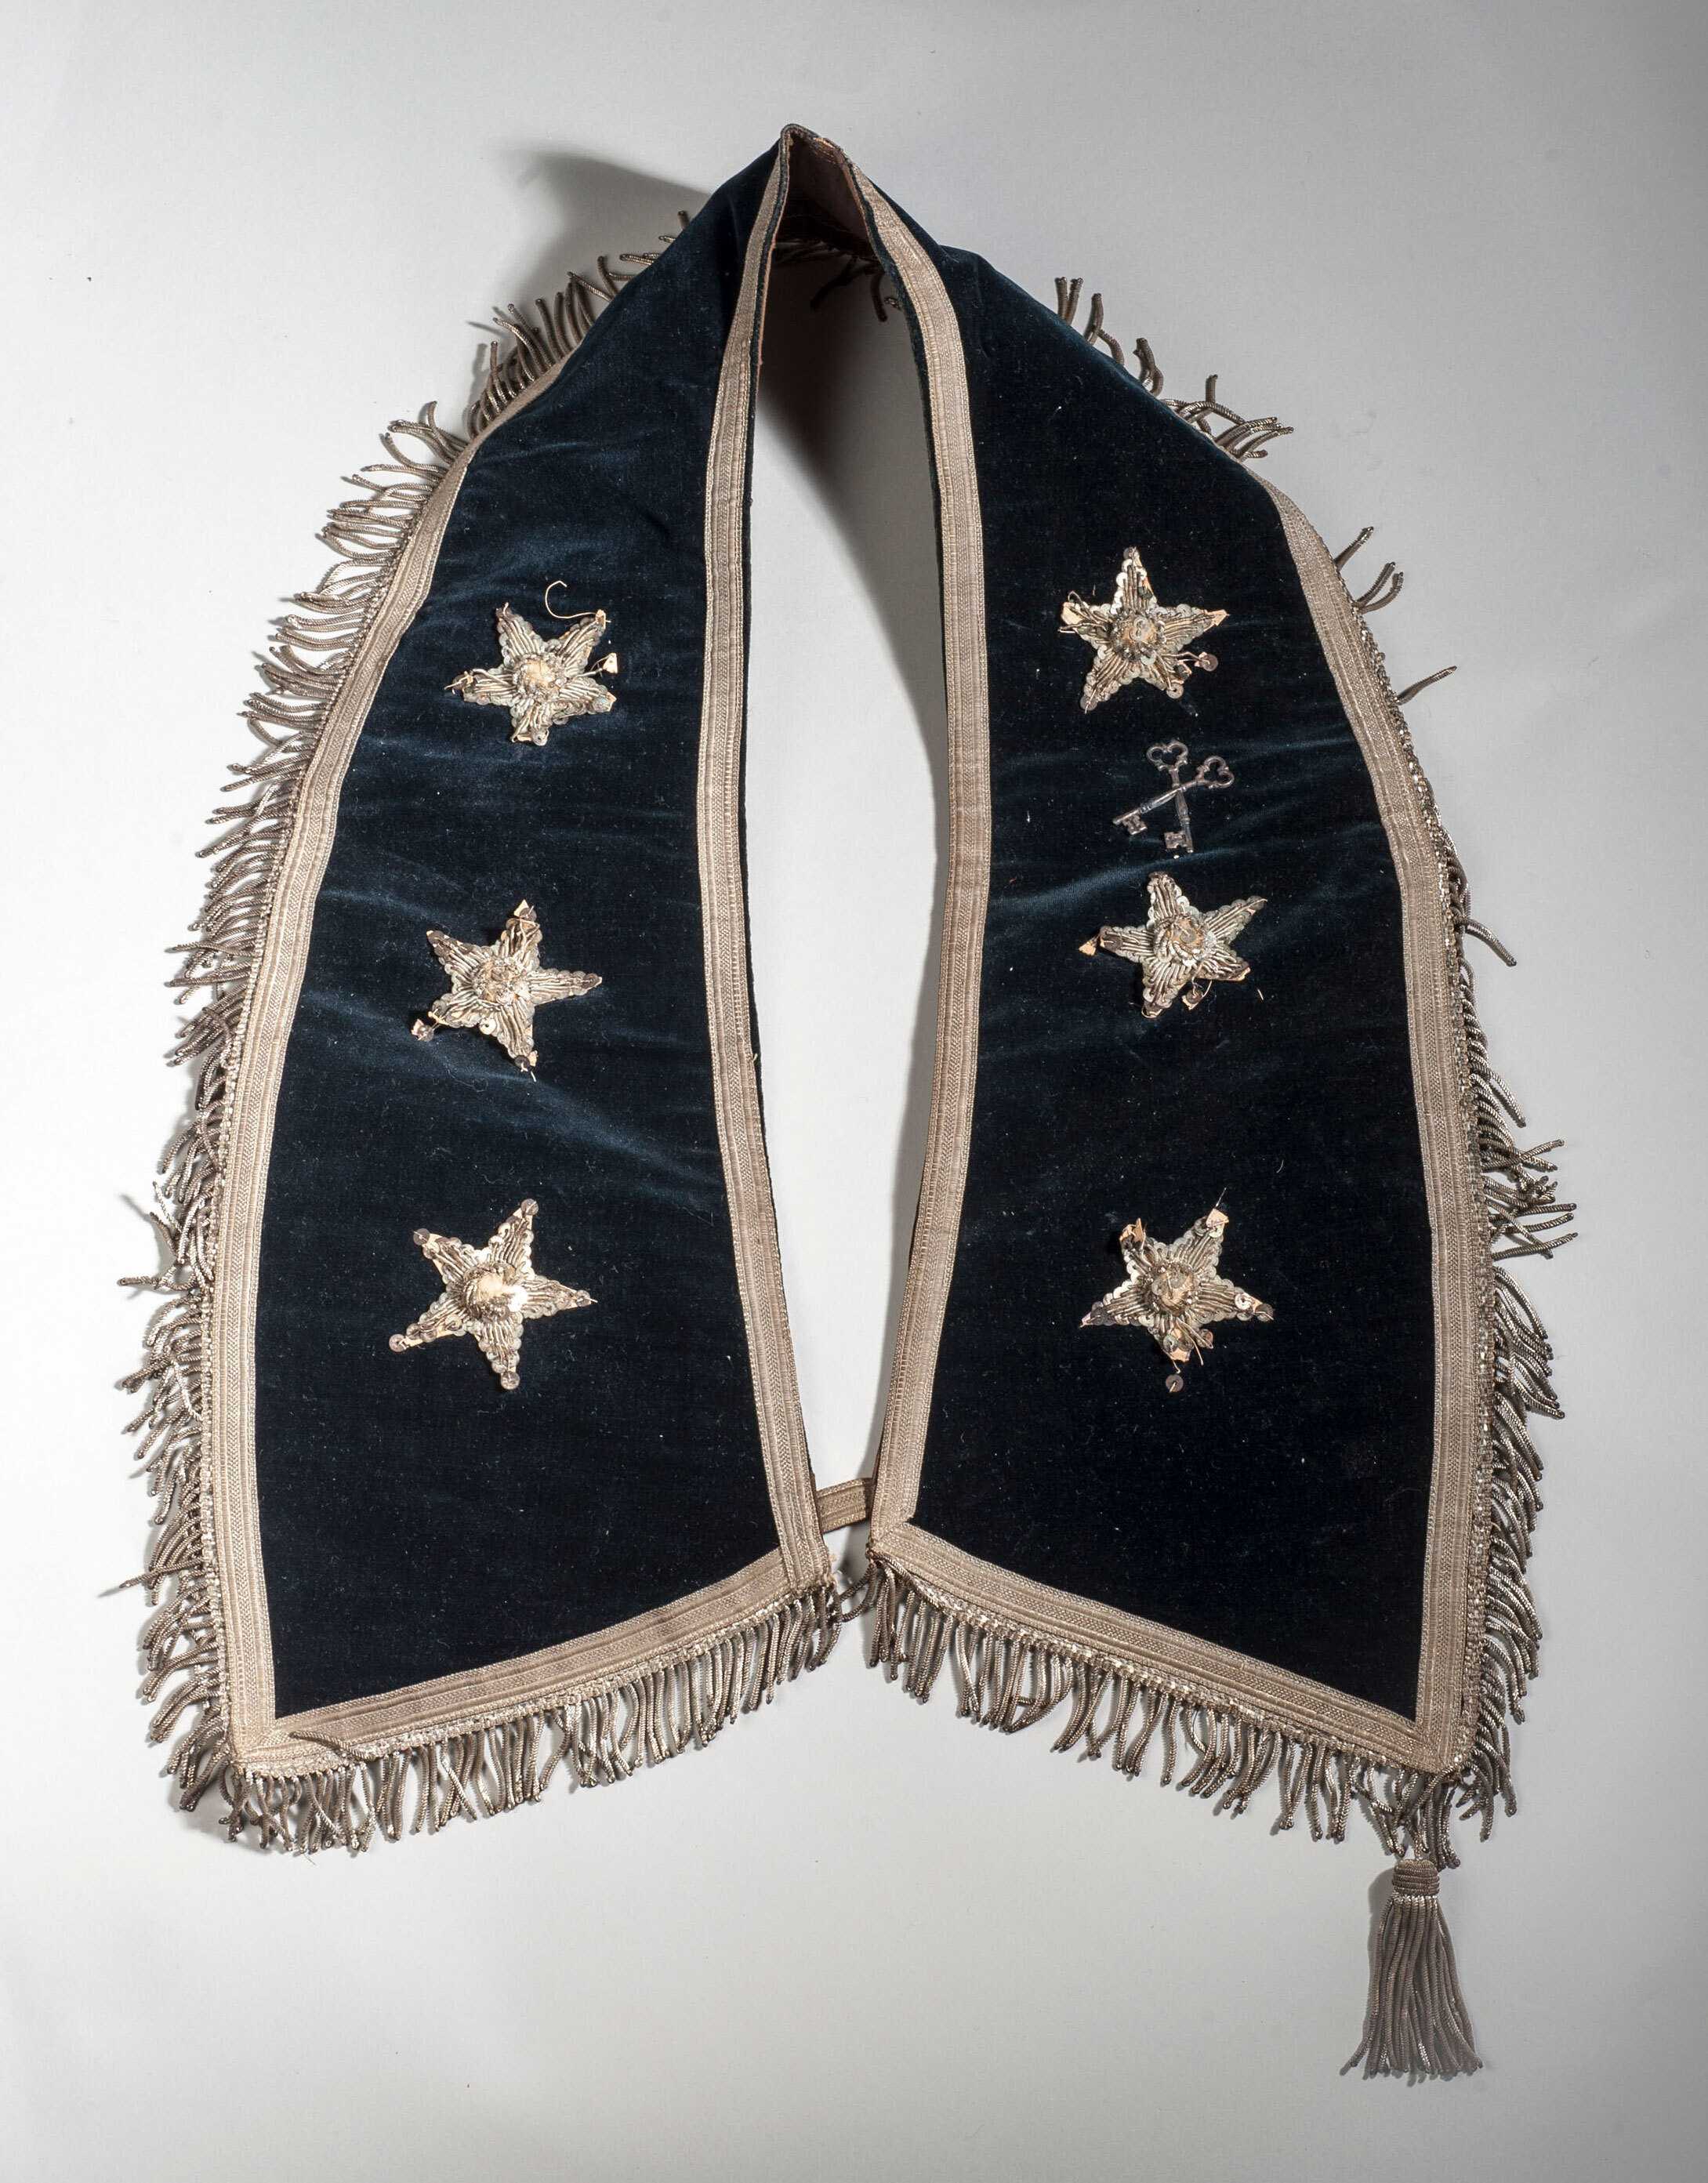 Blue velvet ceremonial collar embroidered with three stars, stacked one on top of the other on each side of the collar.   The collar  is trimmed with off white fringe and and one tassel.  There are two criss crossed keys embroidered between the first and second stars on the right hand side of the collar.